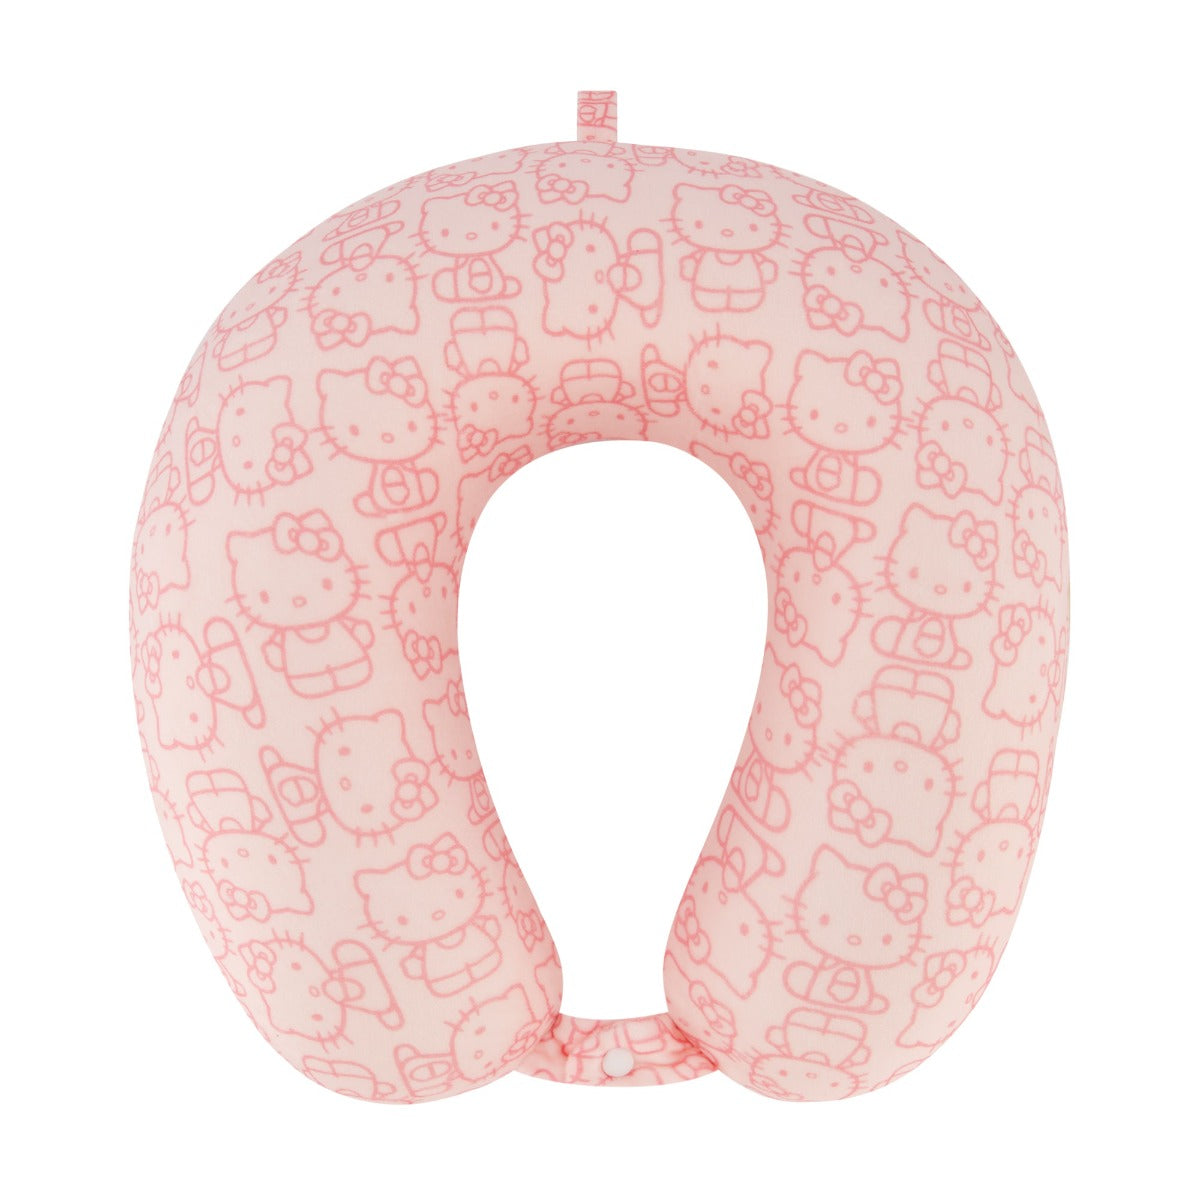 Pink Ful Hello Kitty All over icon memory foam neck pillow - best travel pillows for traveling